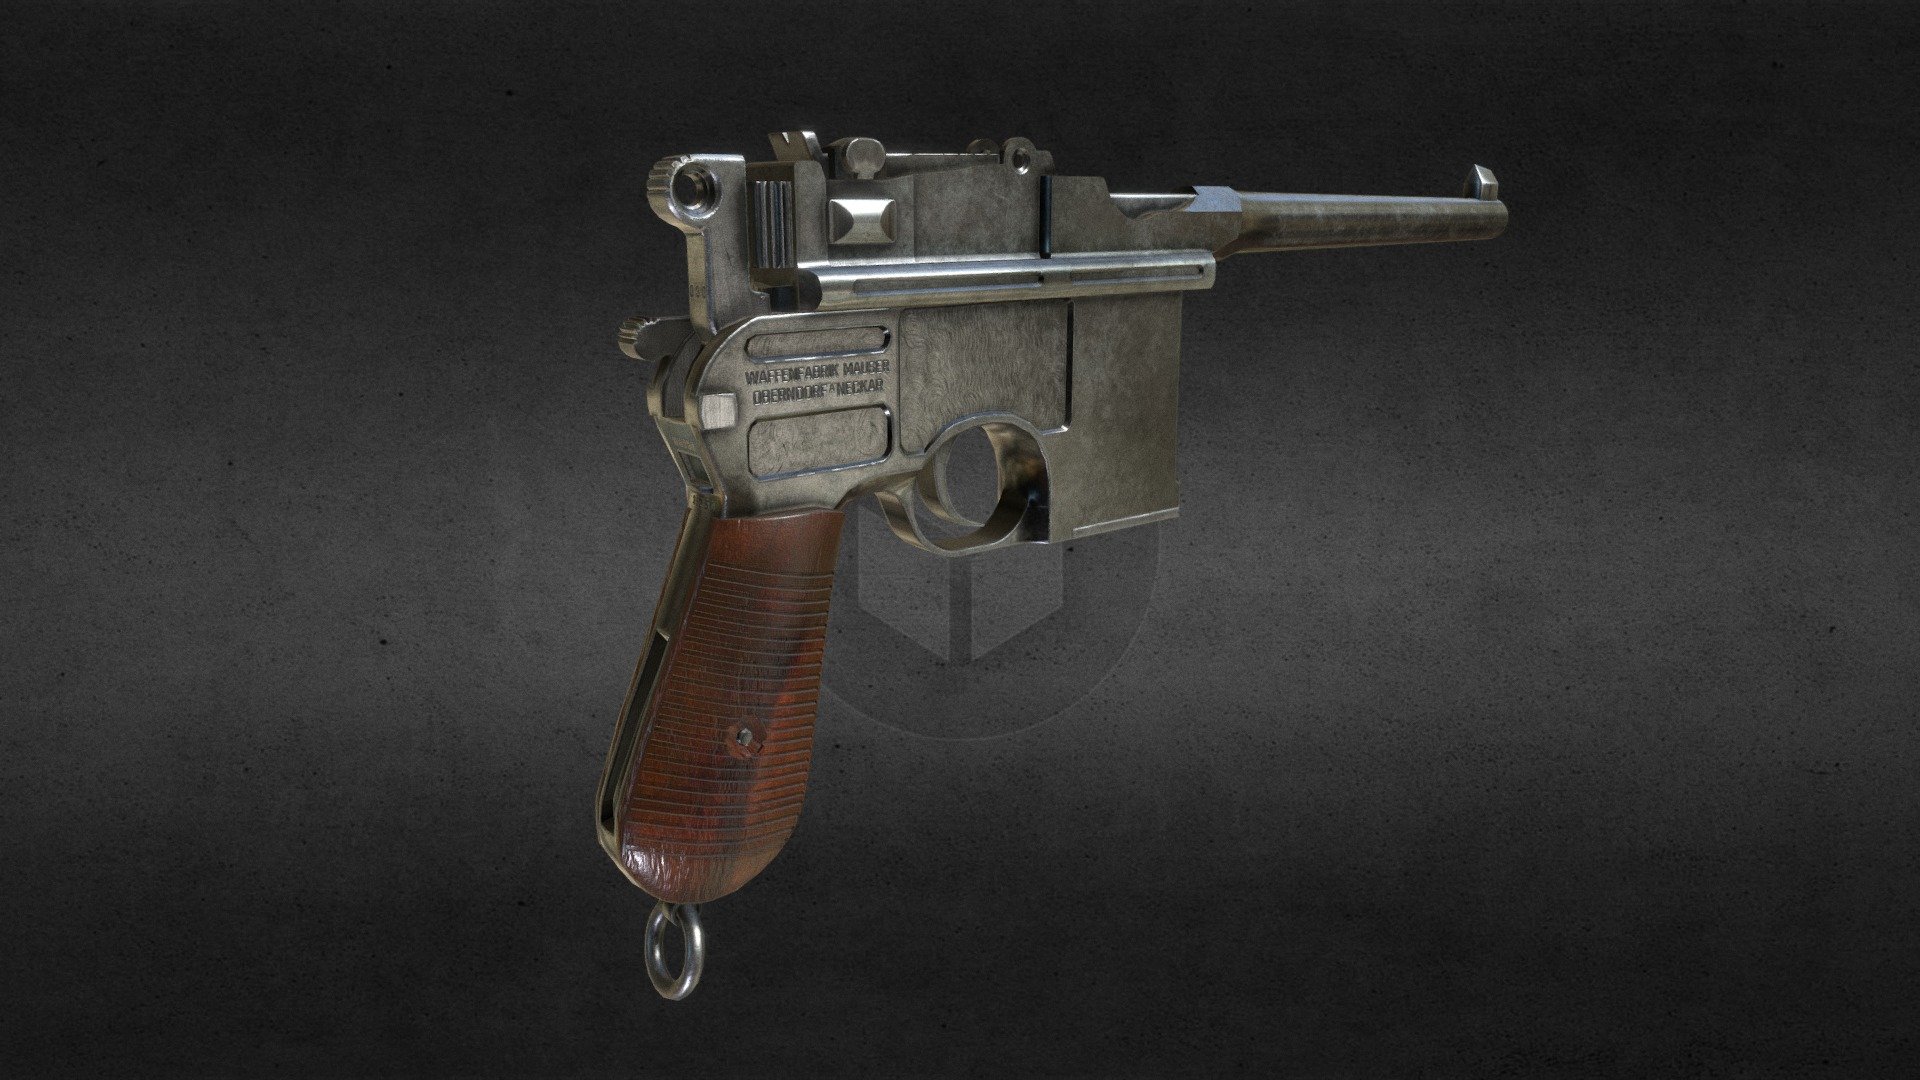 Low poly C96 mauser pistol , modeled in blender and texured in substance painter.

keep me motivated to upload more by supporting me on my patreon page: https://www.patreon.com/fozieus - Low poly C96 mauser pistol - 3D model by fozieus 3d model